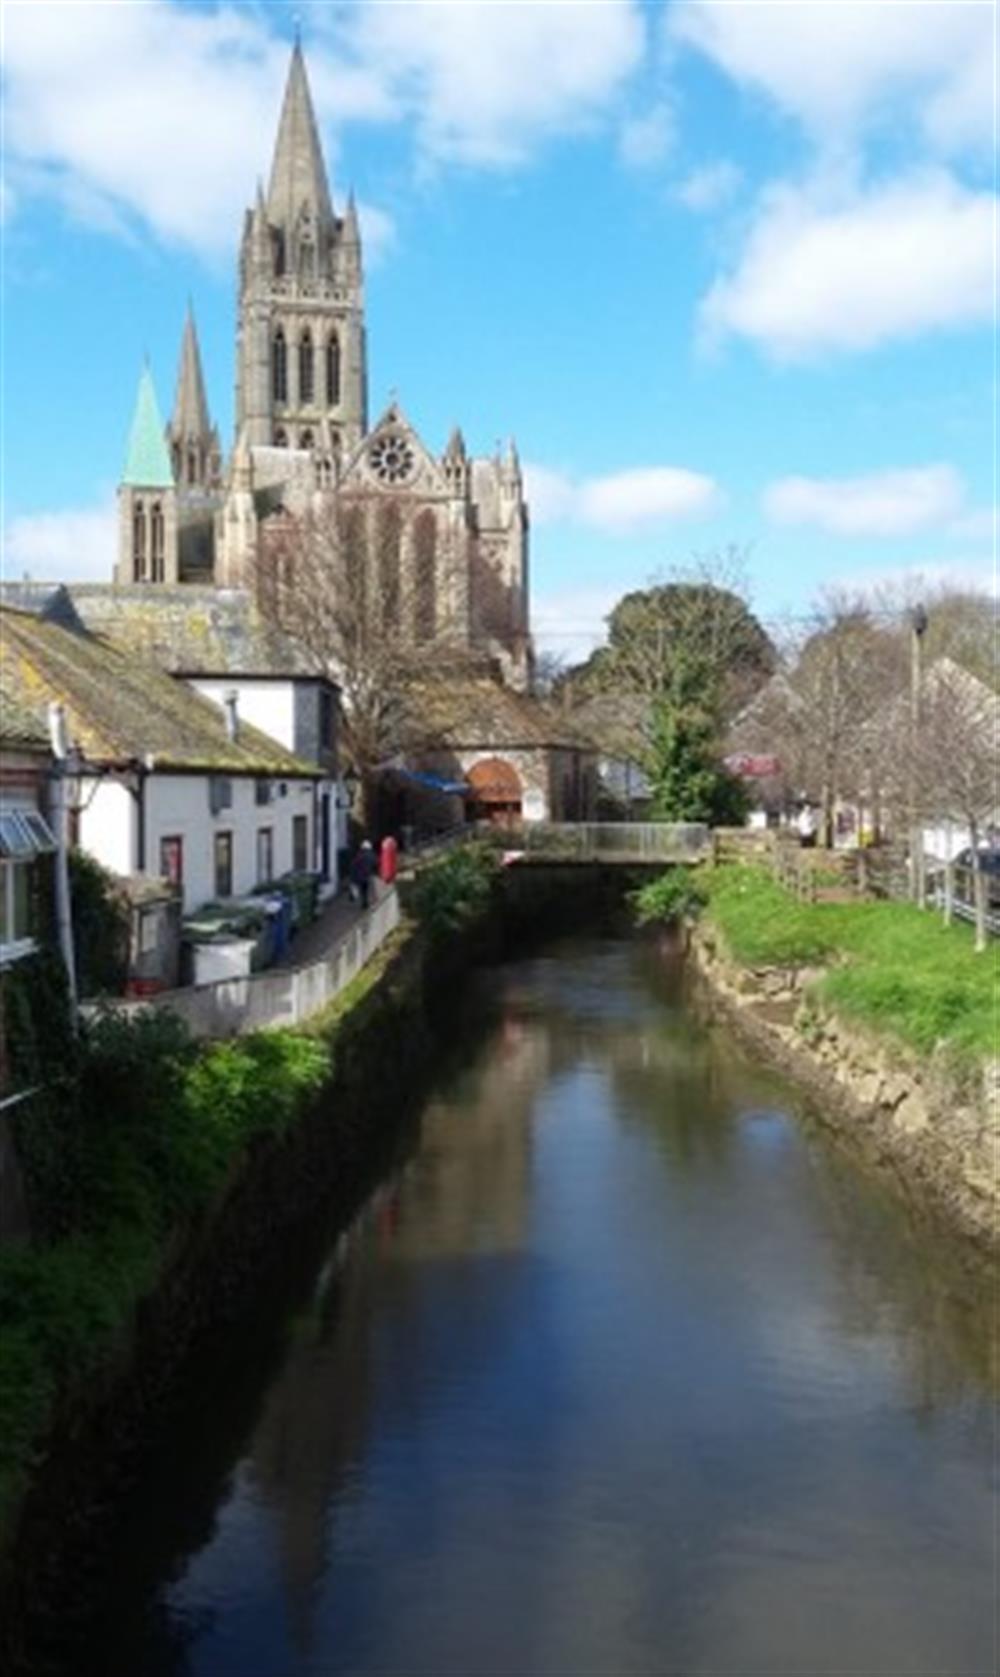 Truro is our main shopping centre. The cathedral is quite beautiful too! at Halliards in Helford Passage